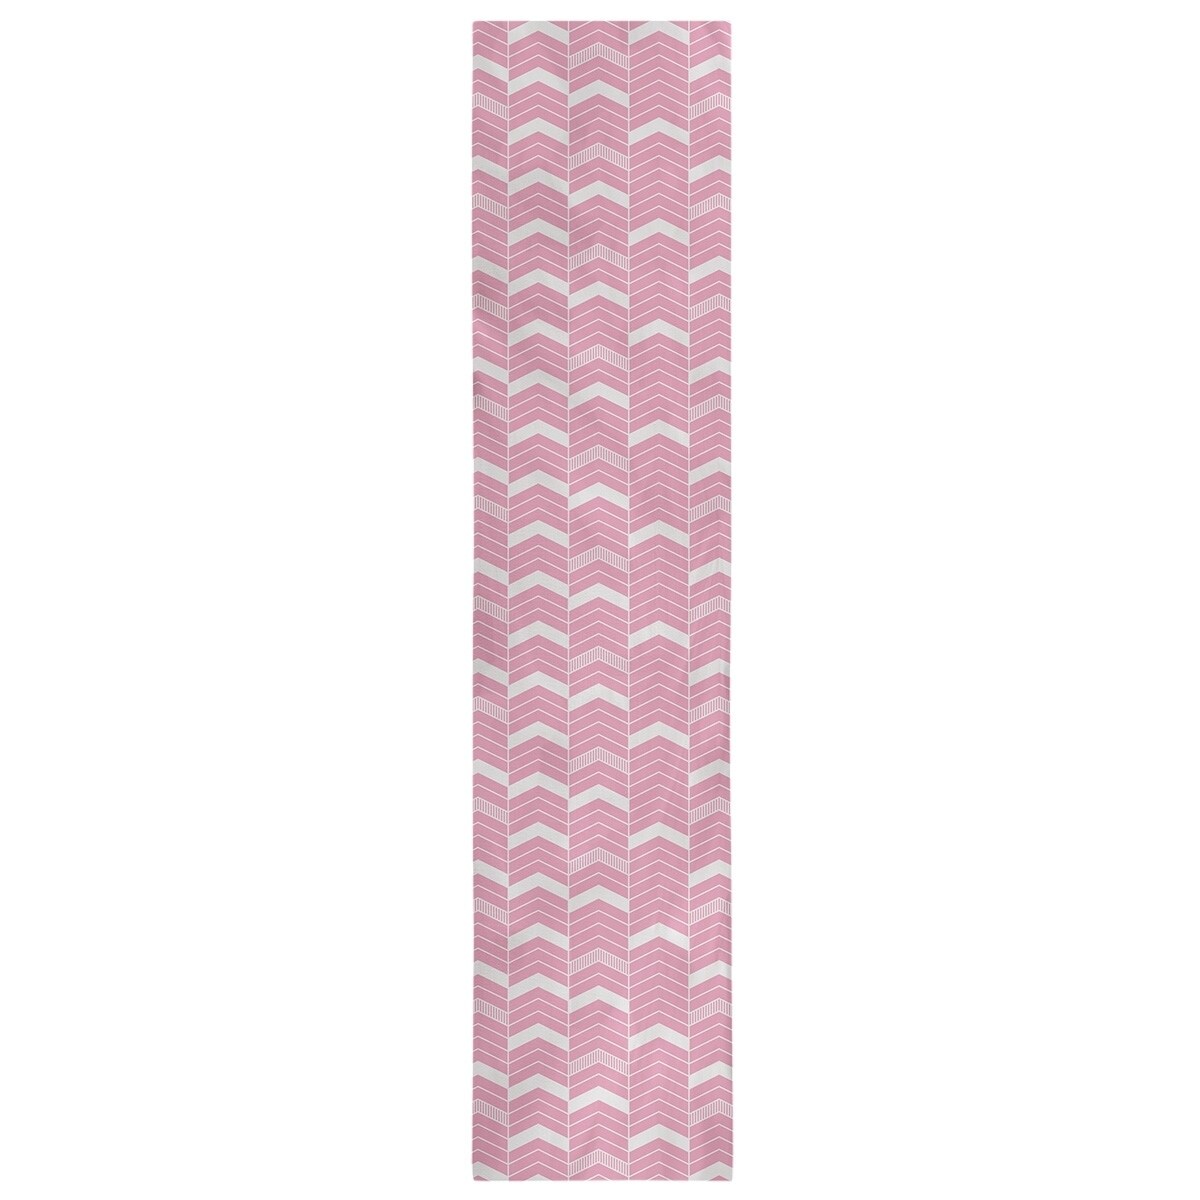 Single Color Lined Chevrons Table Runner